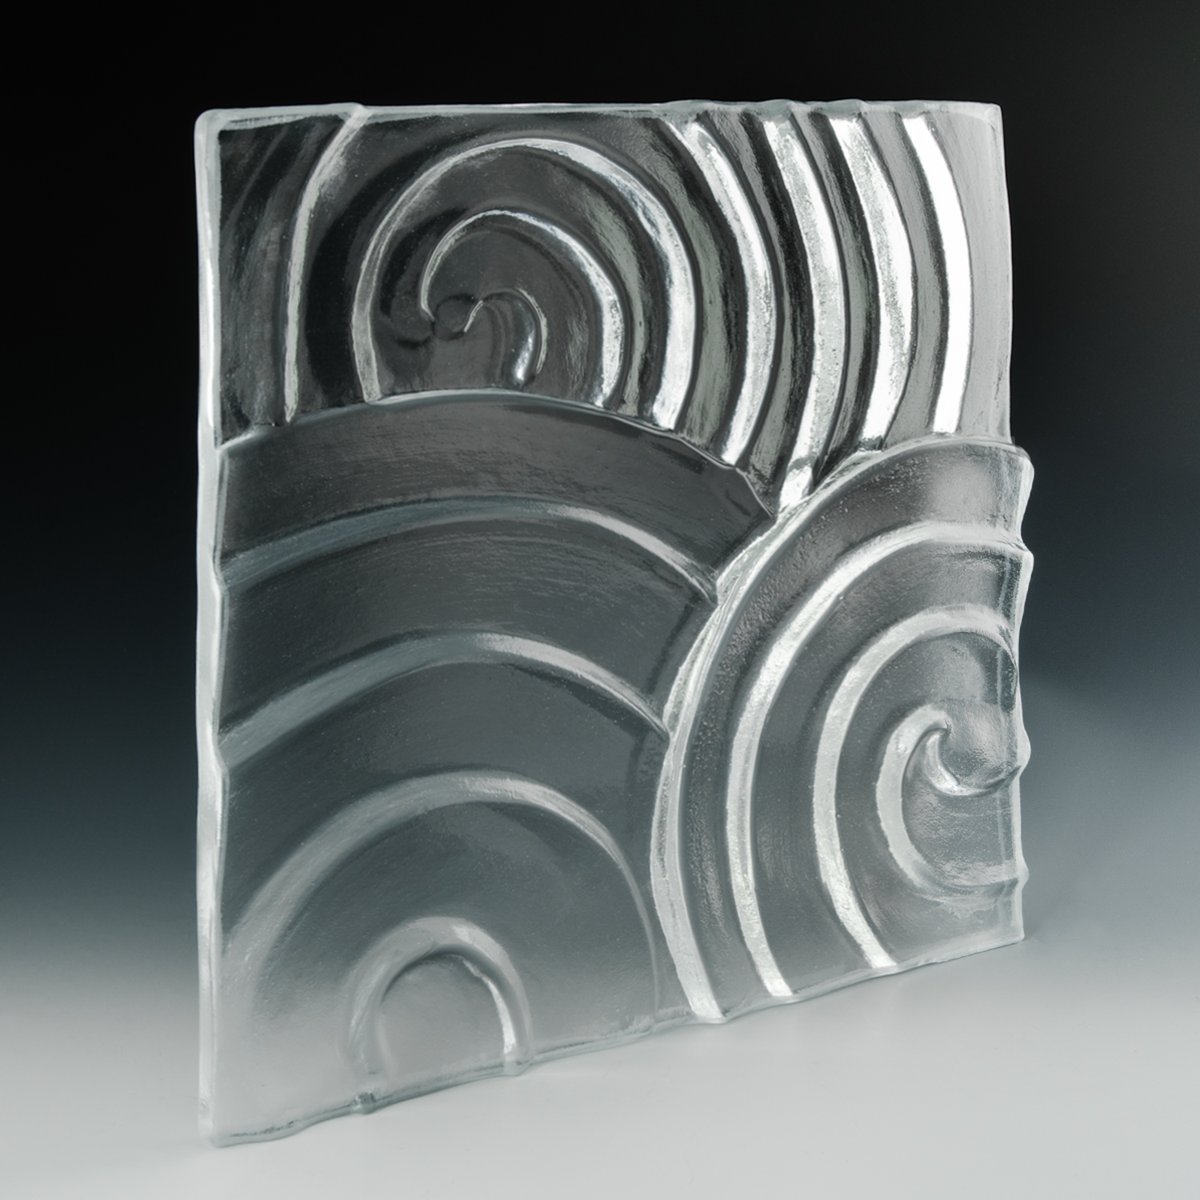 Nathan Allan produces over 150+ impressive glass designs, along with bold color options. Specify our unique textured glass in your next project to brighten your interior or exterior space, and add richness to your design. 
Texture: Clear Swirl Glass
#glass #kilnformedglass #swirl